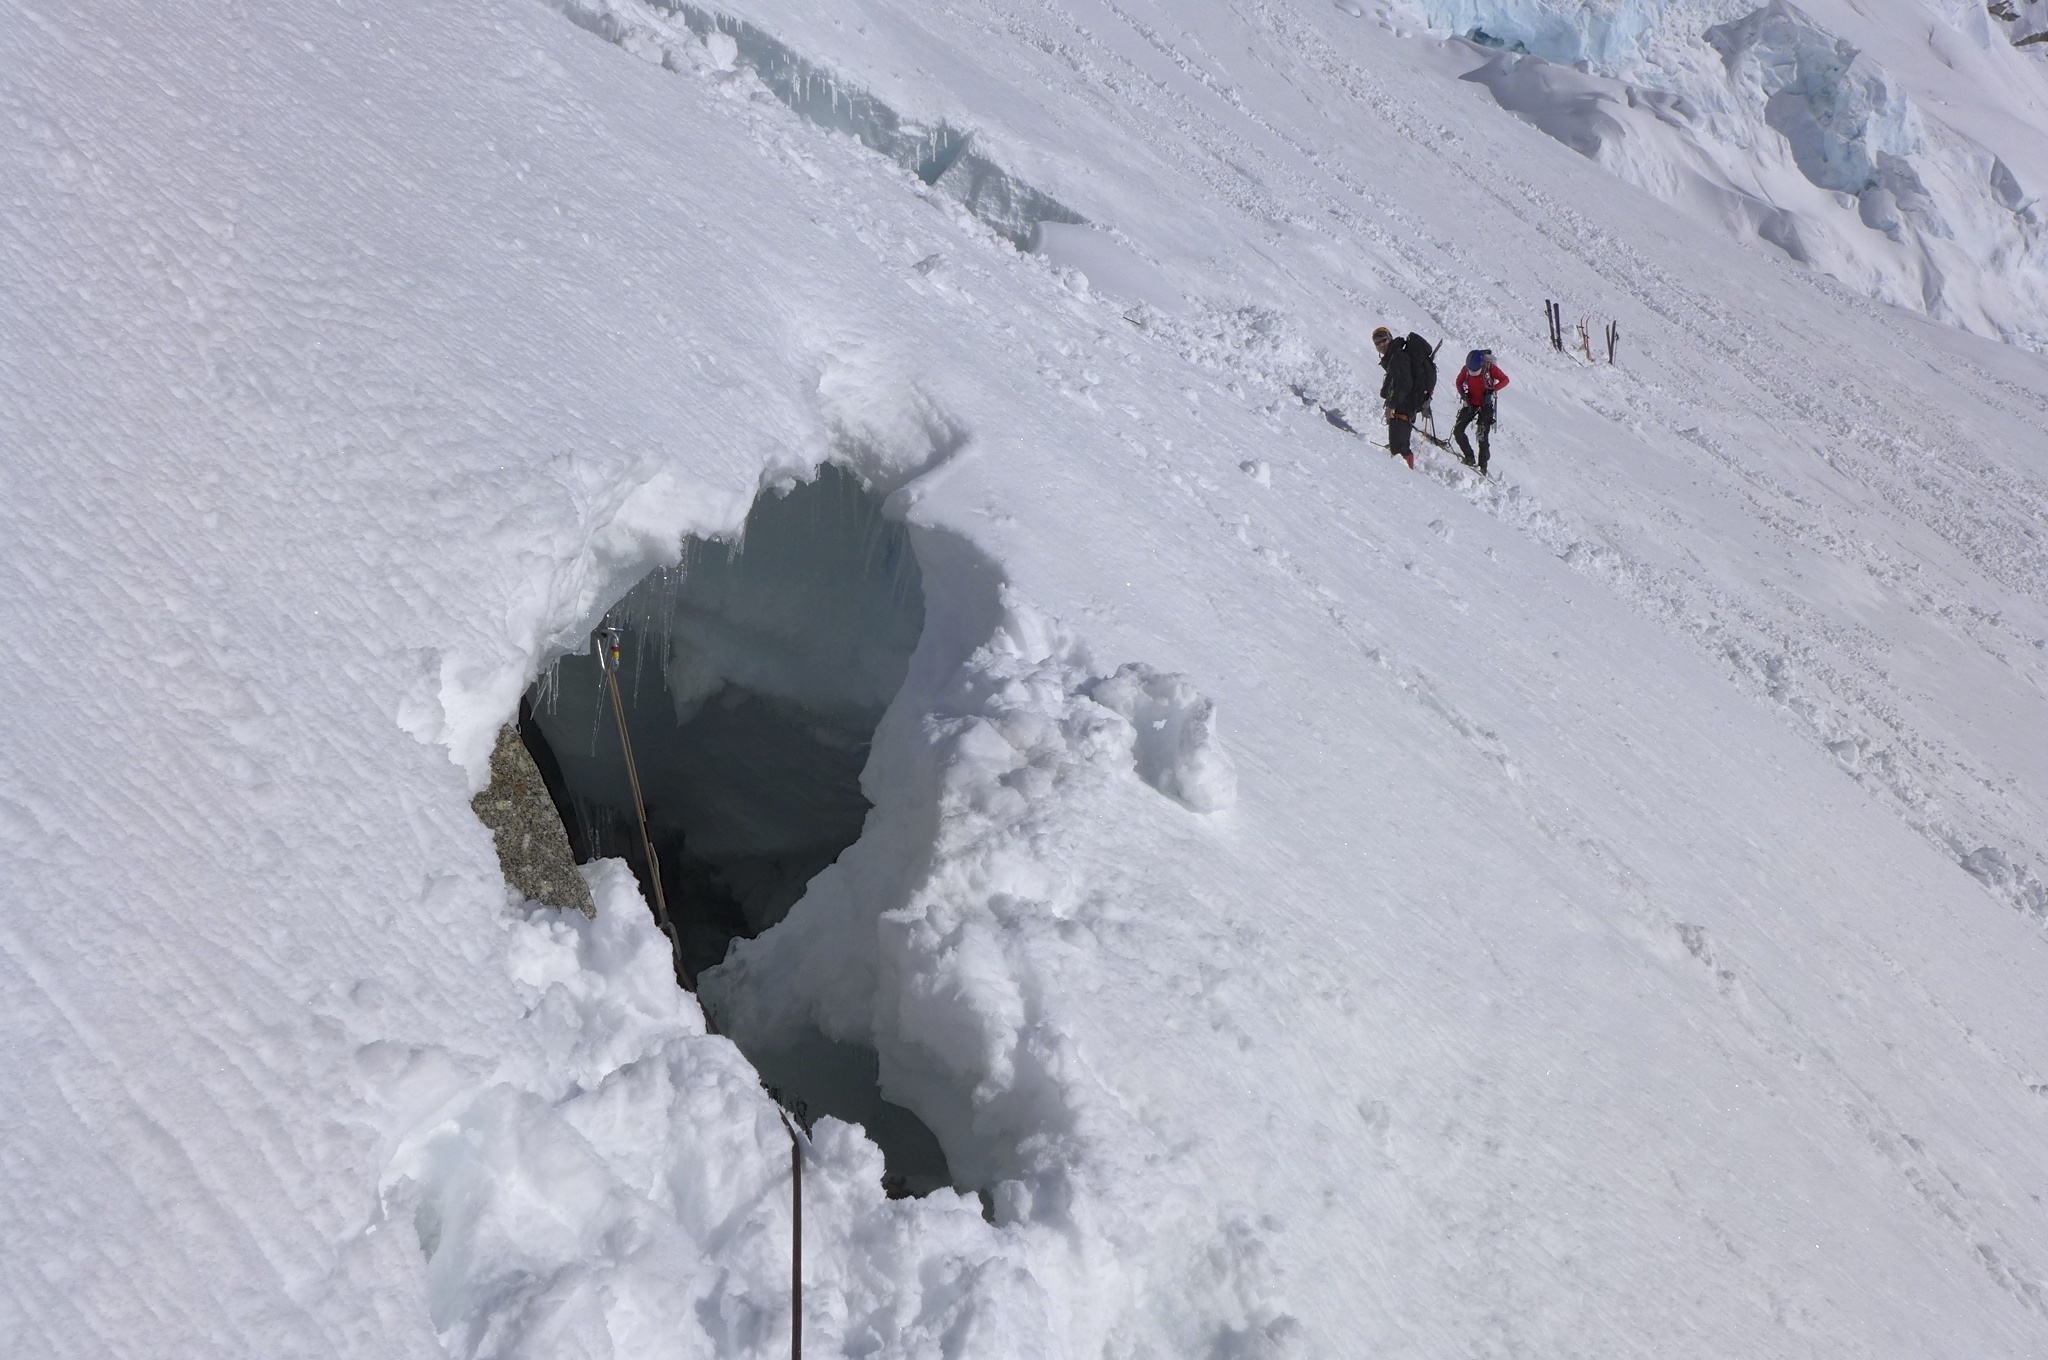 A hole drops into a steeply sloped, snow-covered glacier. Two people stand in the background on the glacier.